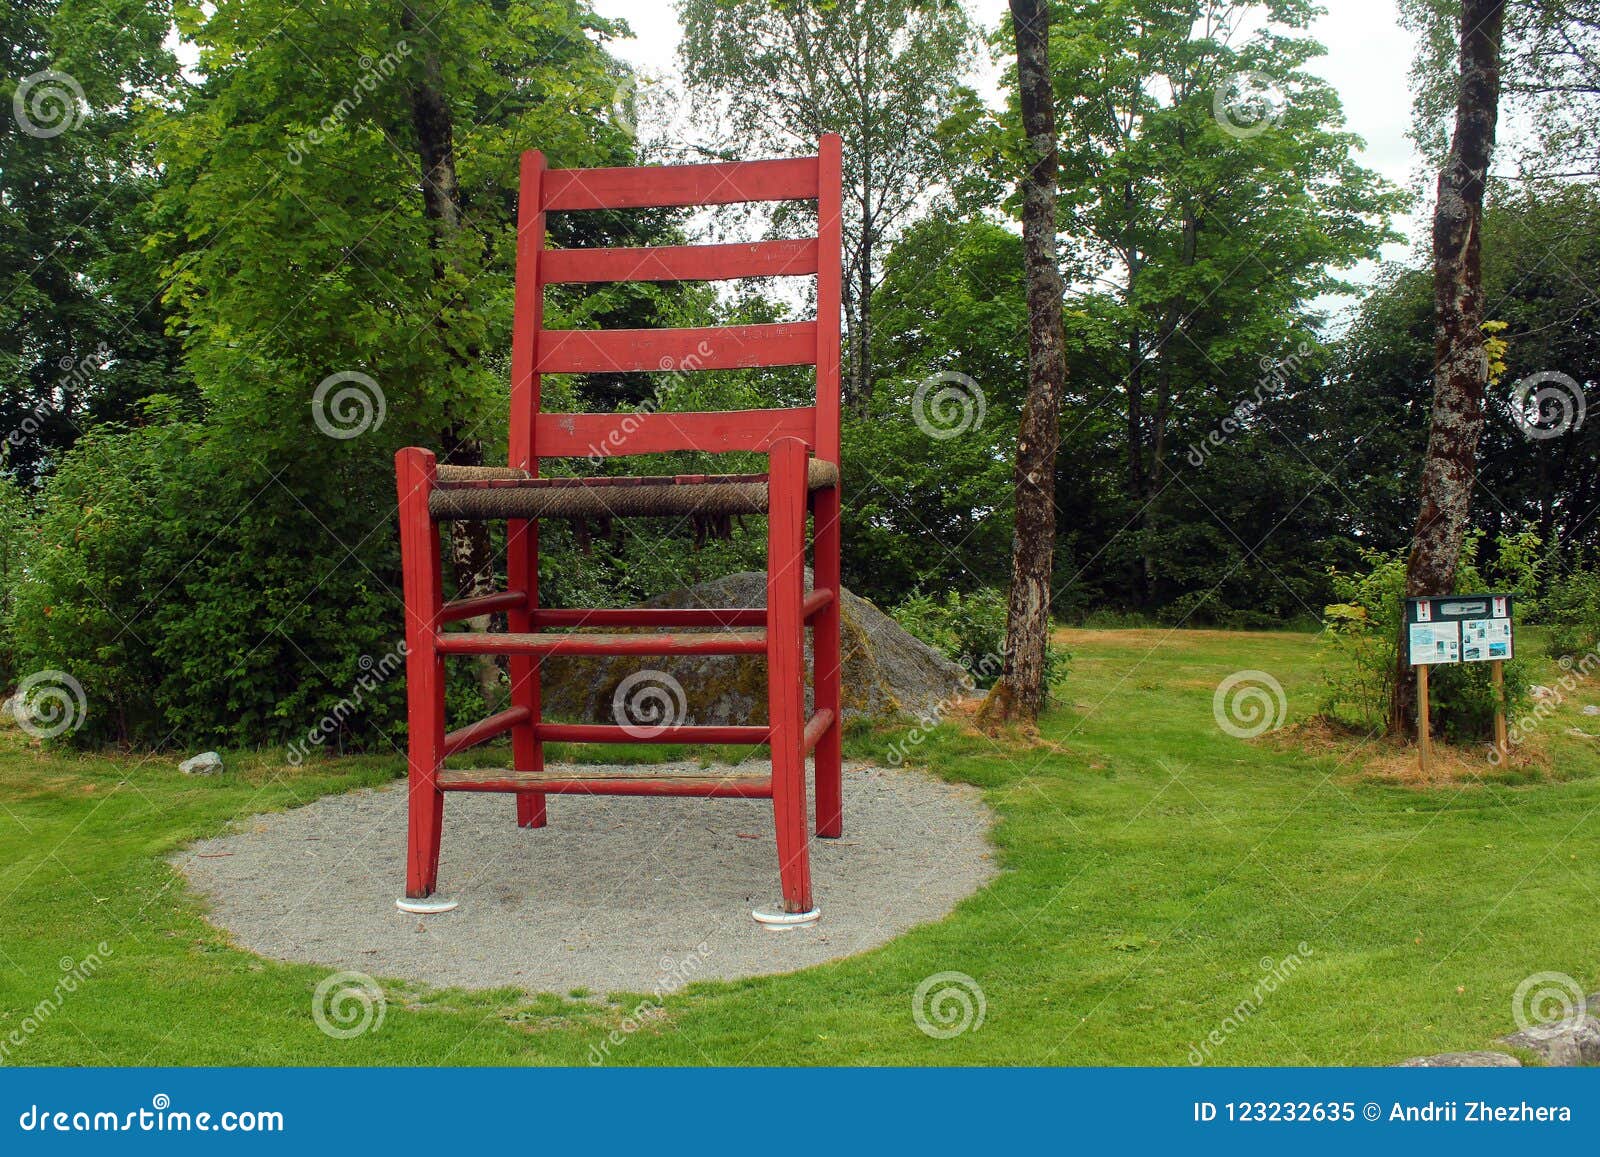 World S Largest Chair In Hjelmeland Norway Editorial Image